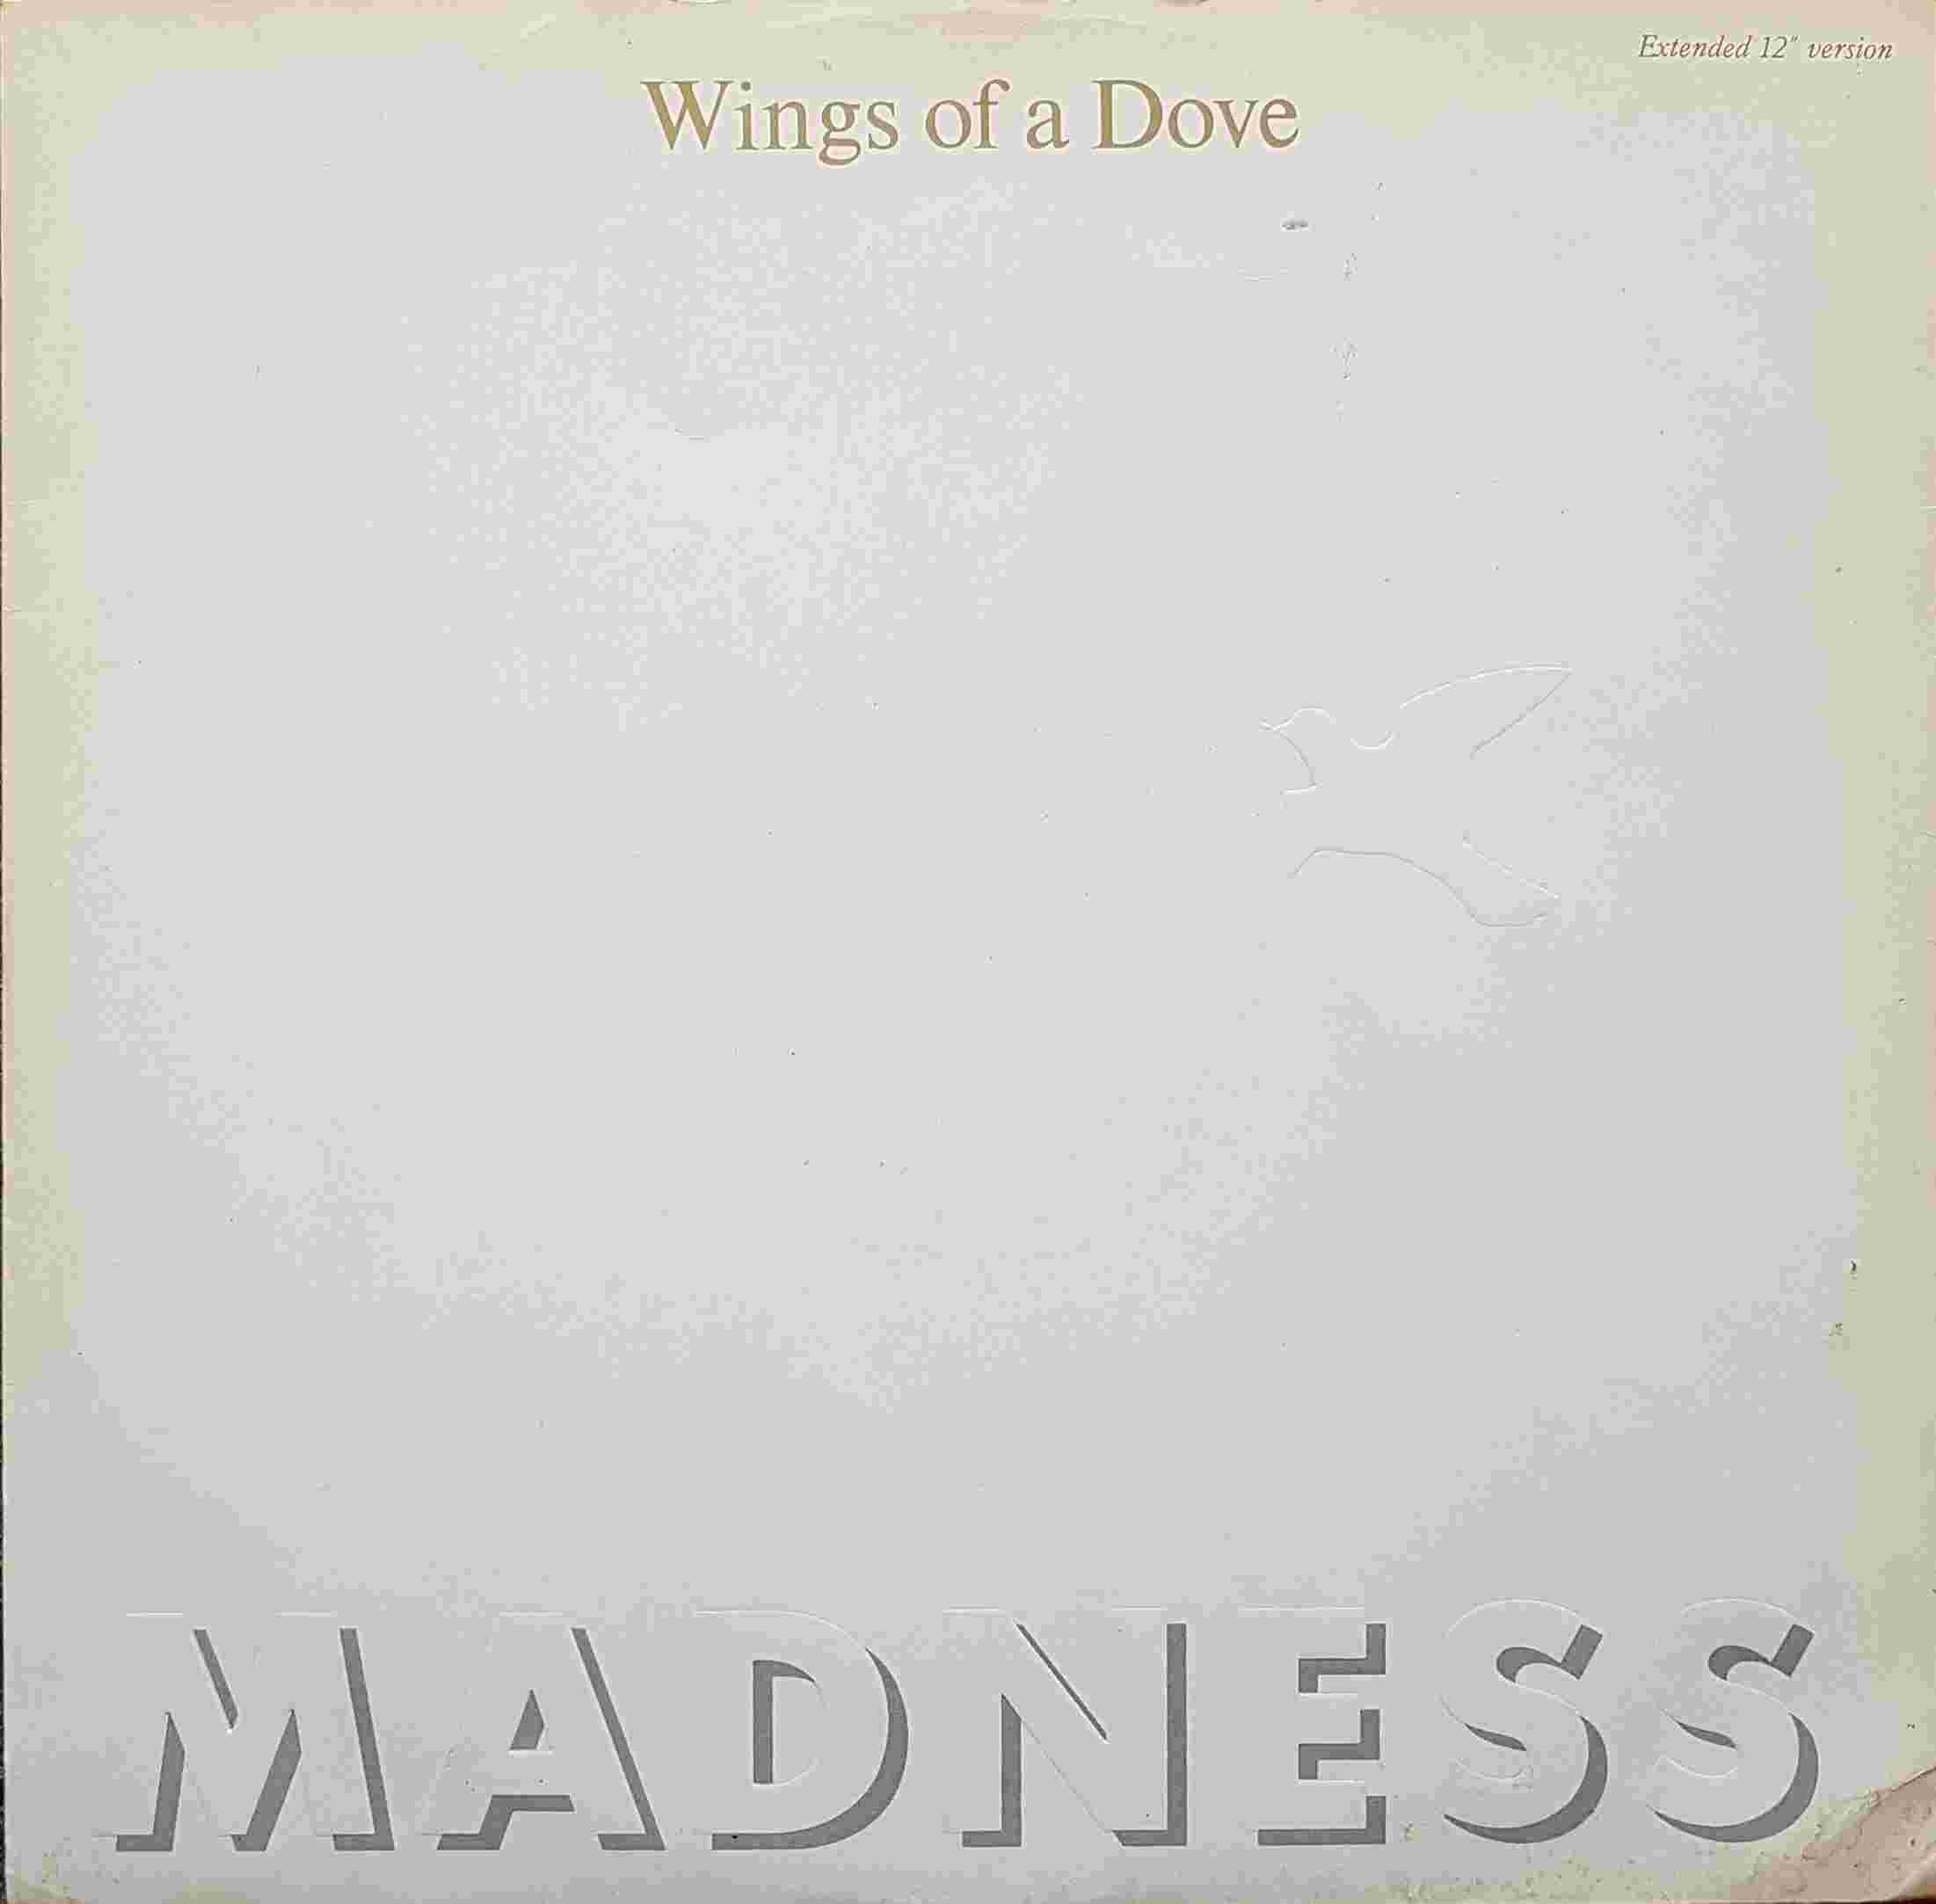 Picture of Wing's of a dove by artist Madness  